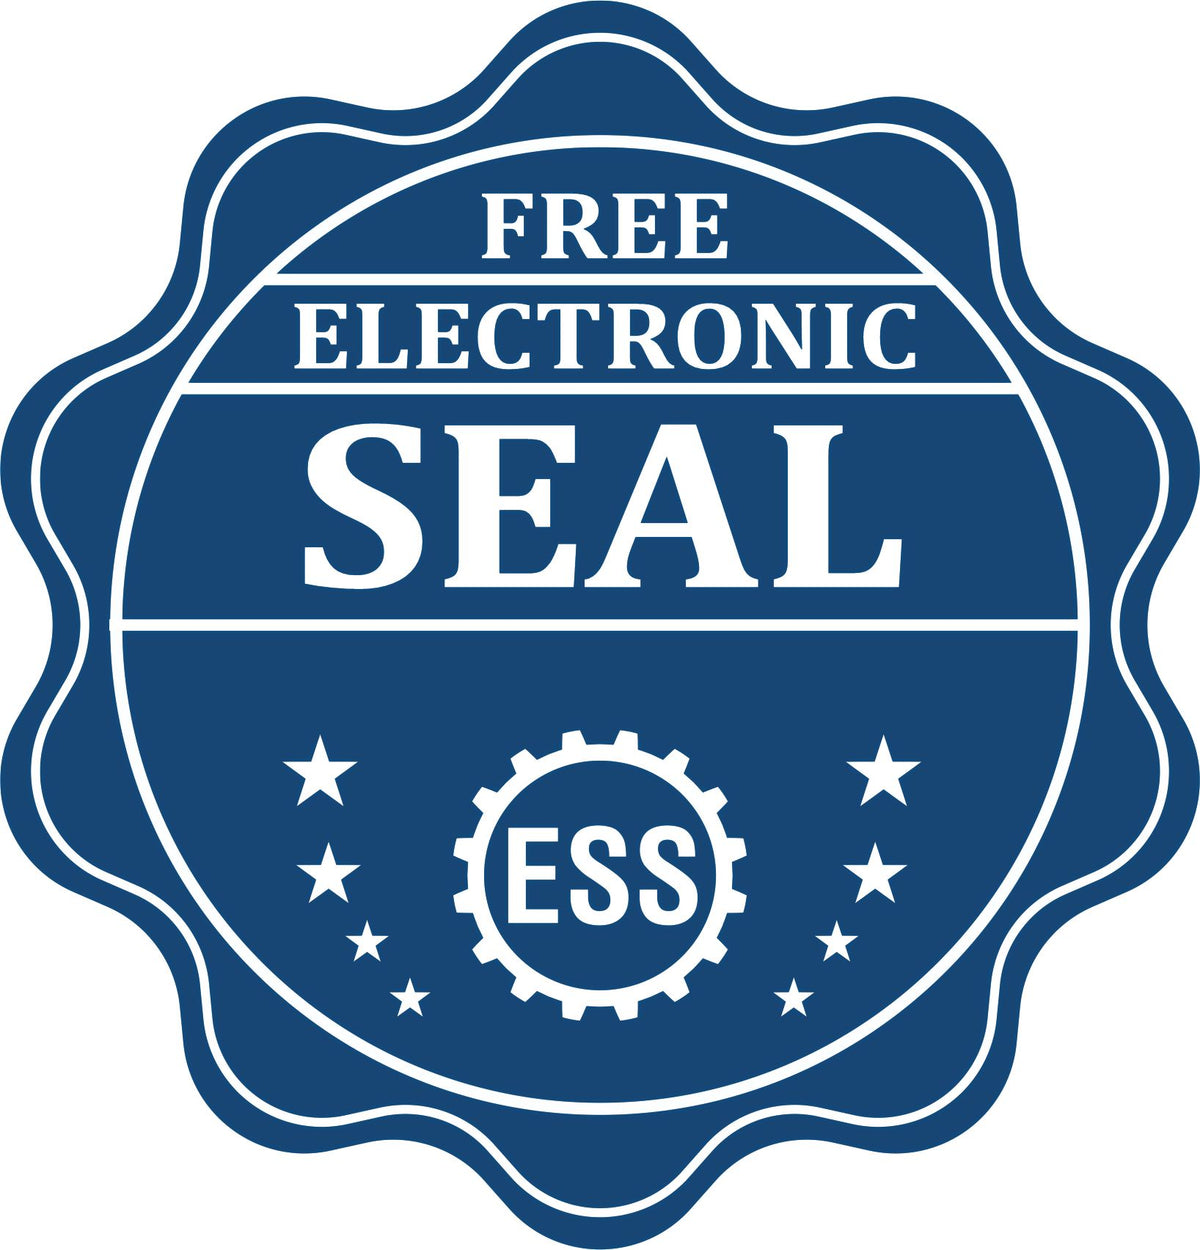 A badge showing a free electronic seal for the State of West Virginia Soft Land Surveyor Embossing Seal with stars and the ESS gear on the emblem.